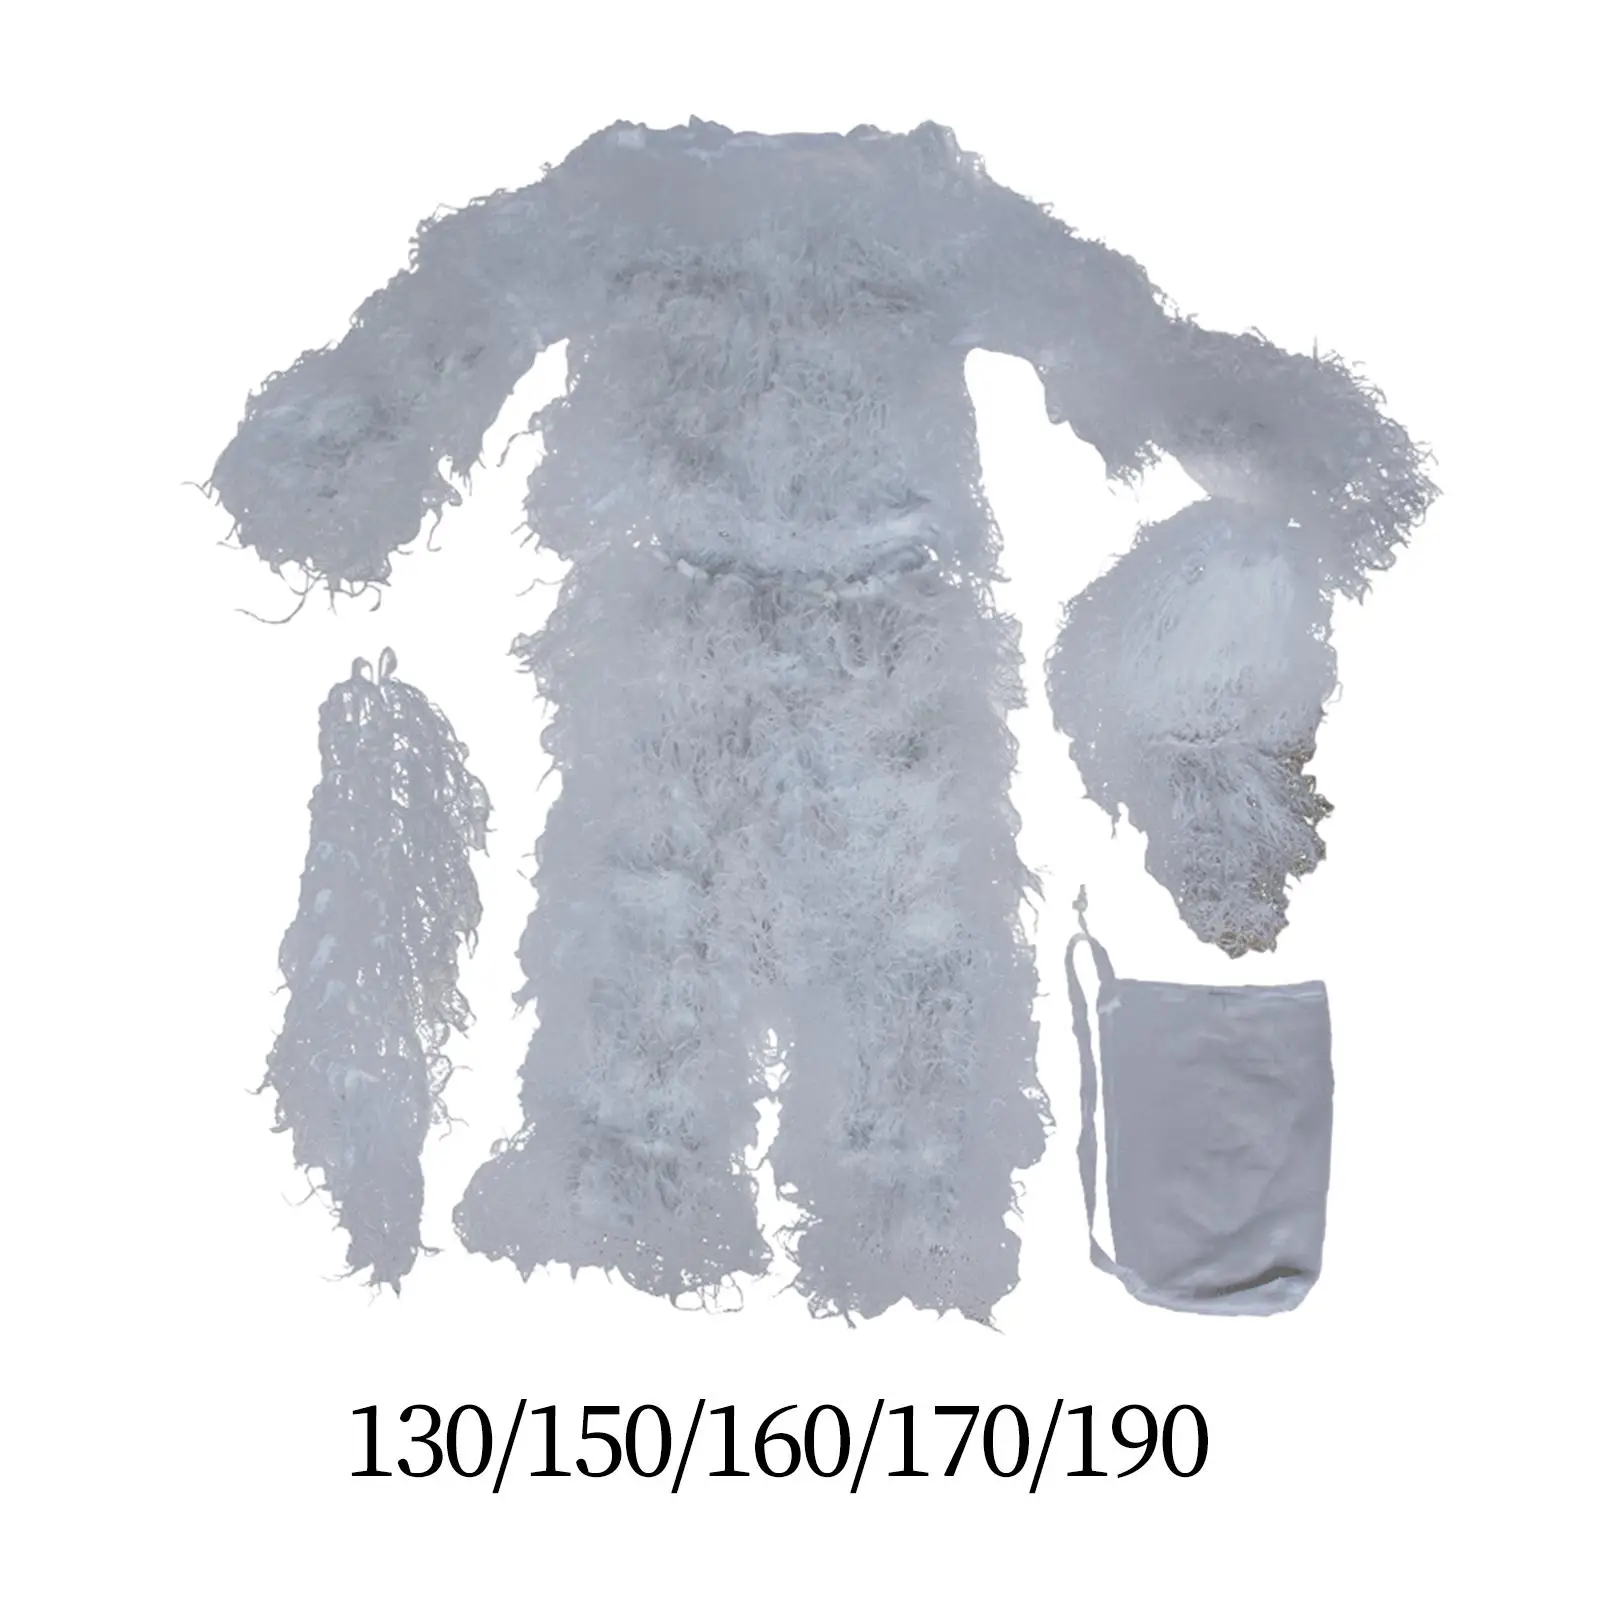 Ghillie Suit Snow Outfit Lightweight Gilly Suit Hunting suits for Turkey Hunting Photography Outdoor Bird Watching